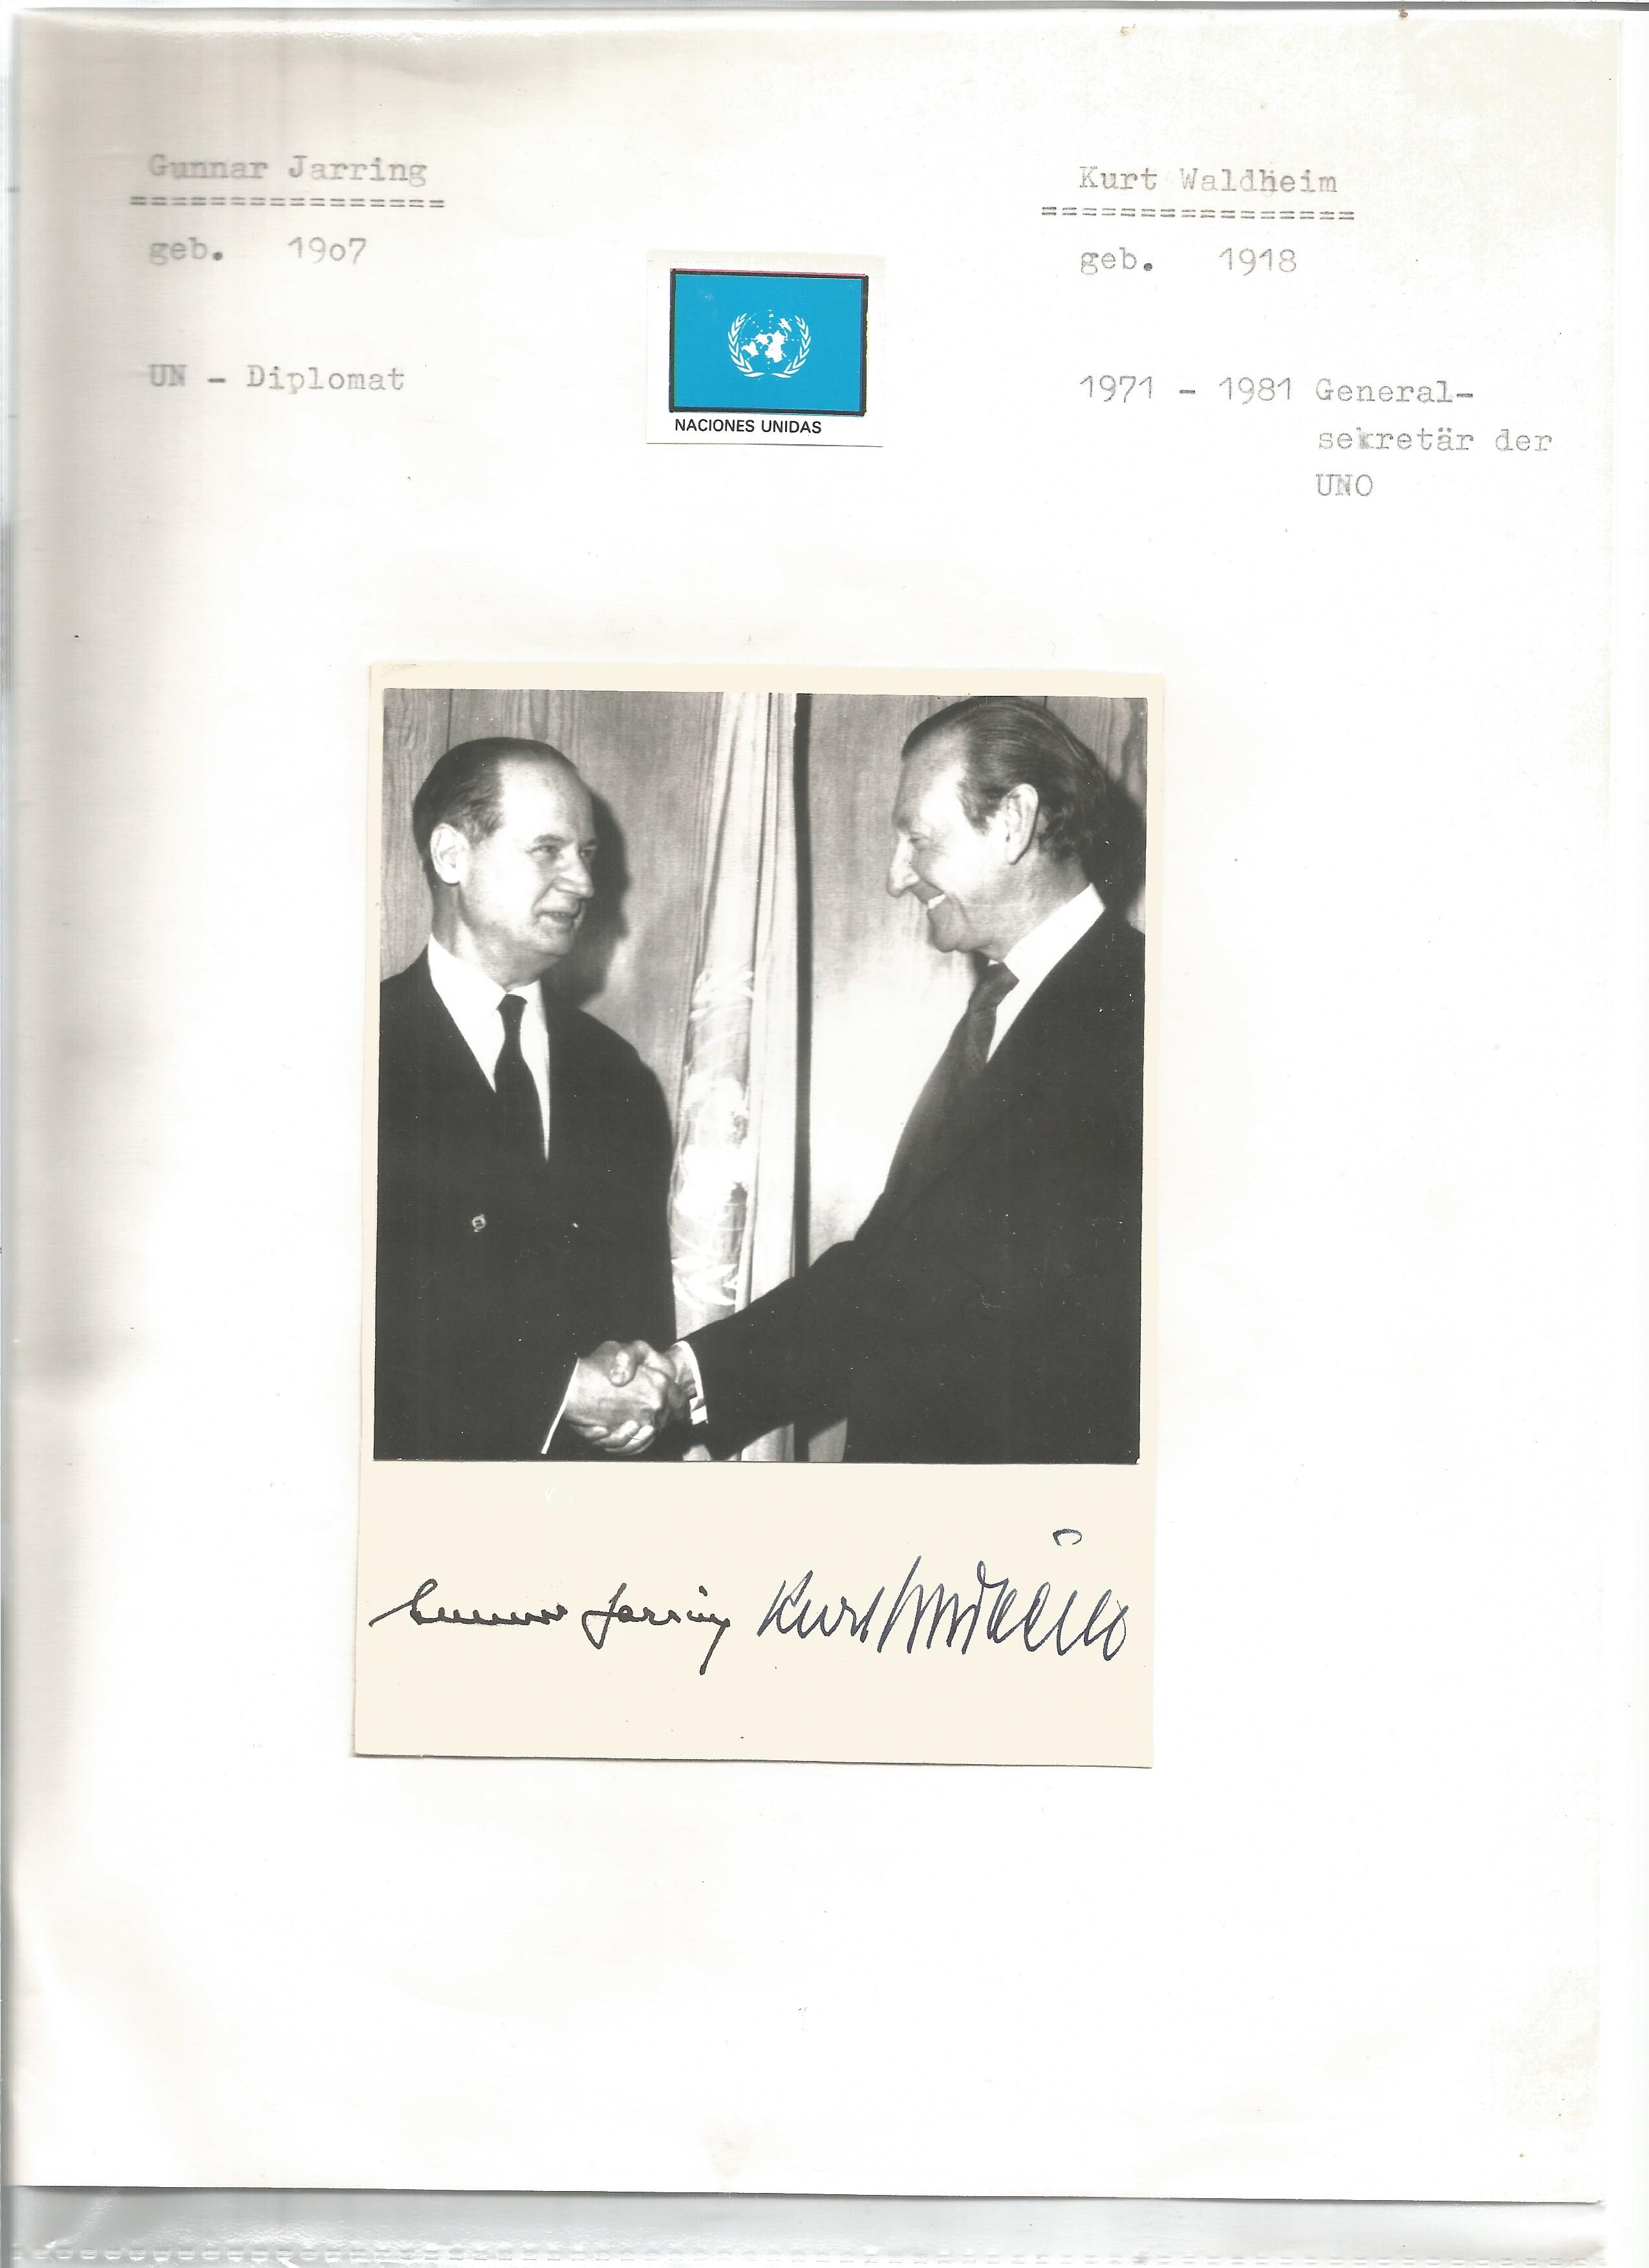 Kurt Waldheim and Gunnar Jarring signed 6 x 4 inch b/w photo mounted onto A4 page. Good Condition.